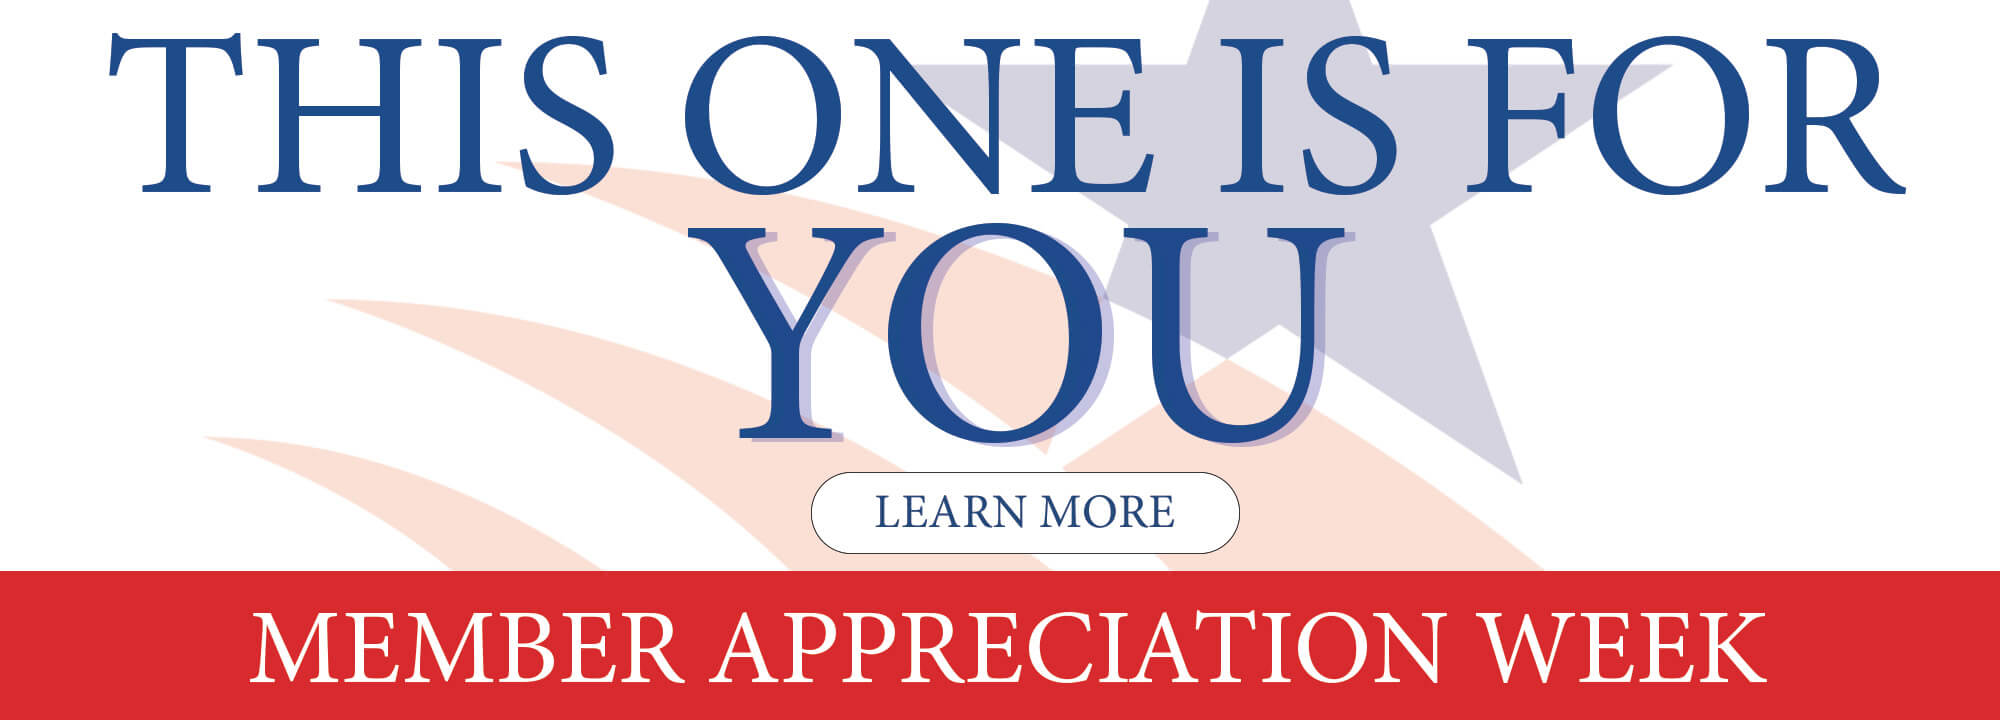 This one is for you. Learn More. Member Appreciation Week. 